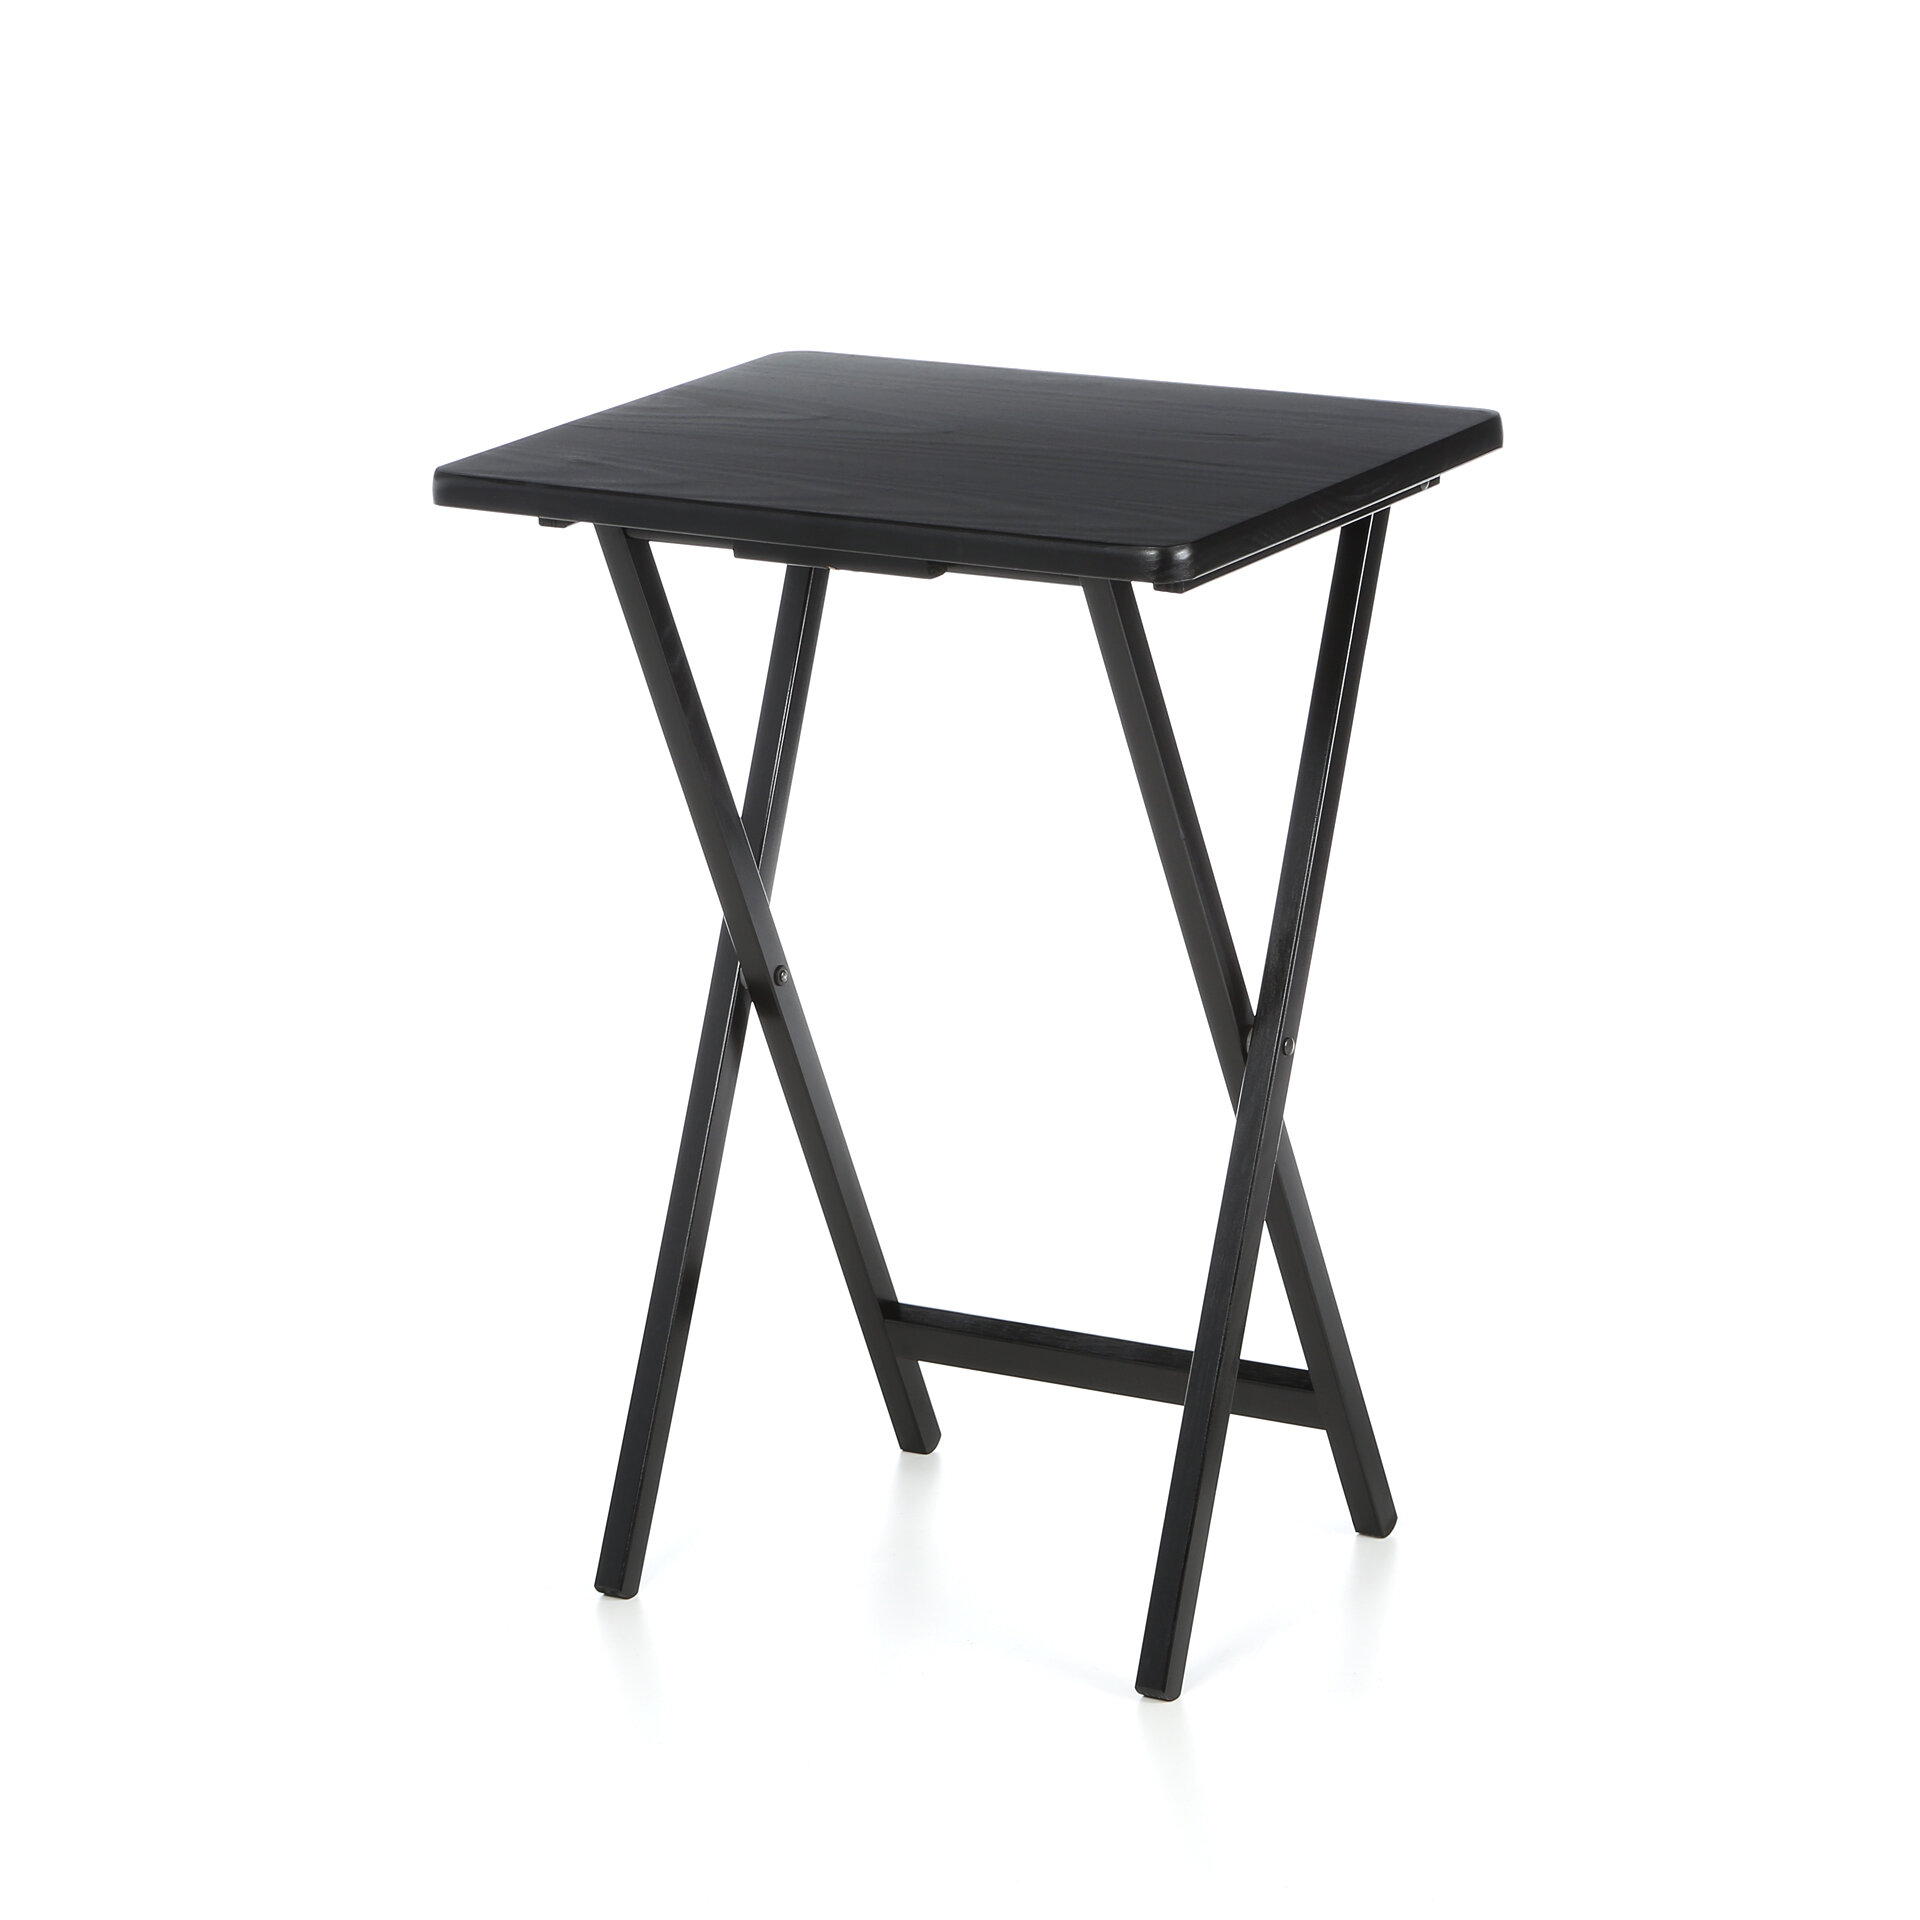 Stand Set Of 4 Folding Table For Movie Dinners Snack Tables Wood Black 